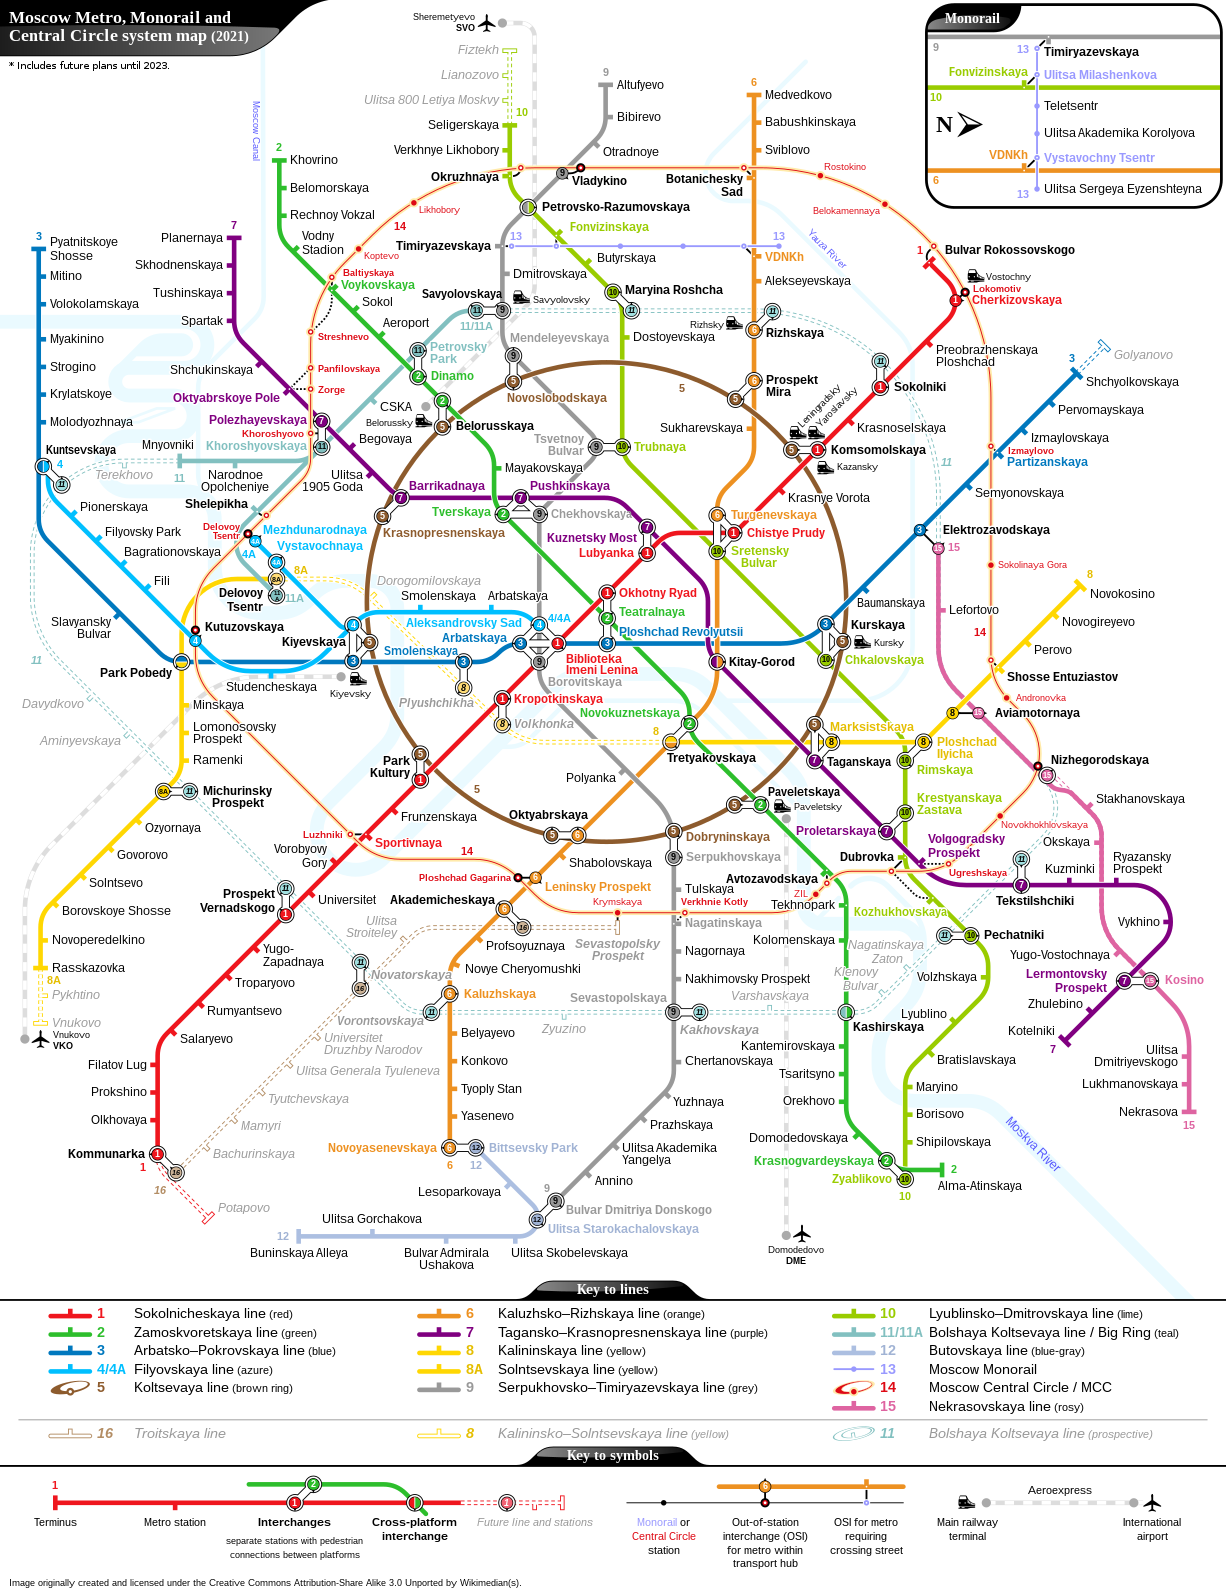 1226px-Moscow_metro_ring_railway_map_en_sb_future.svg.png